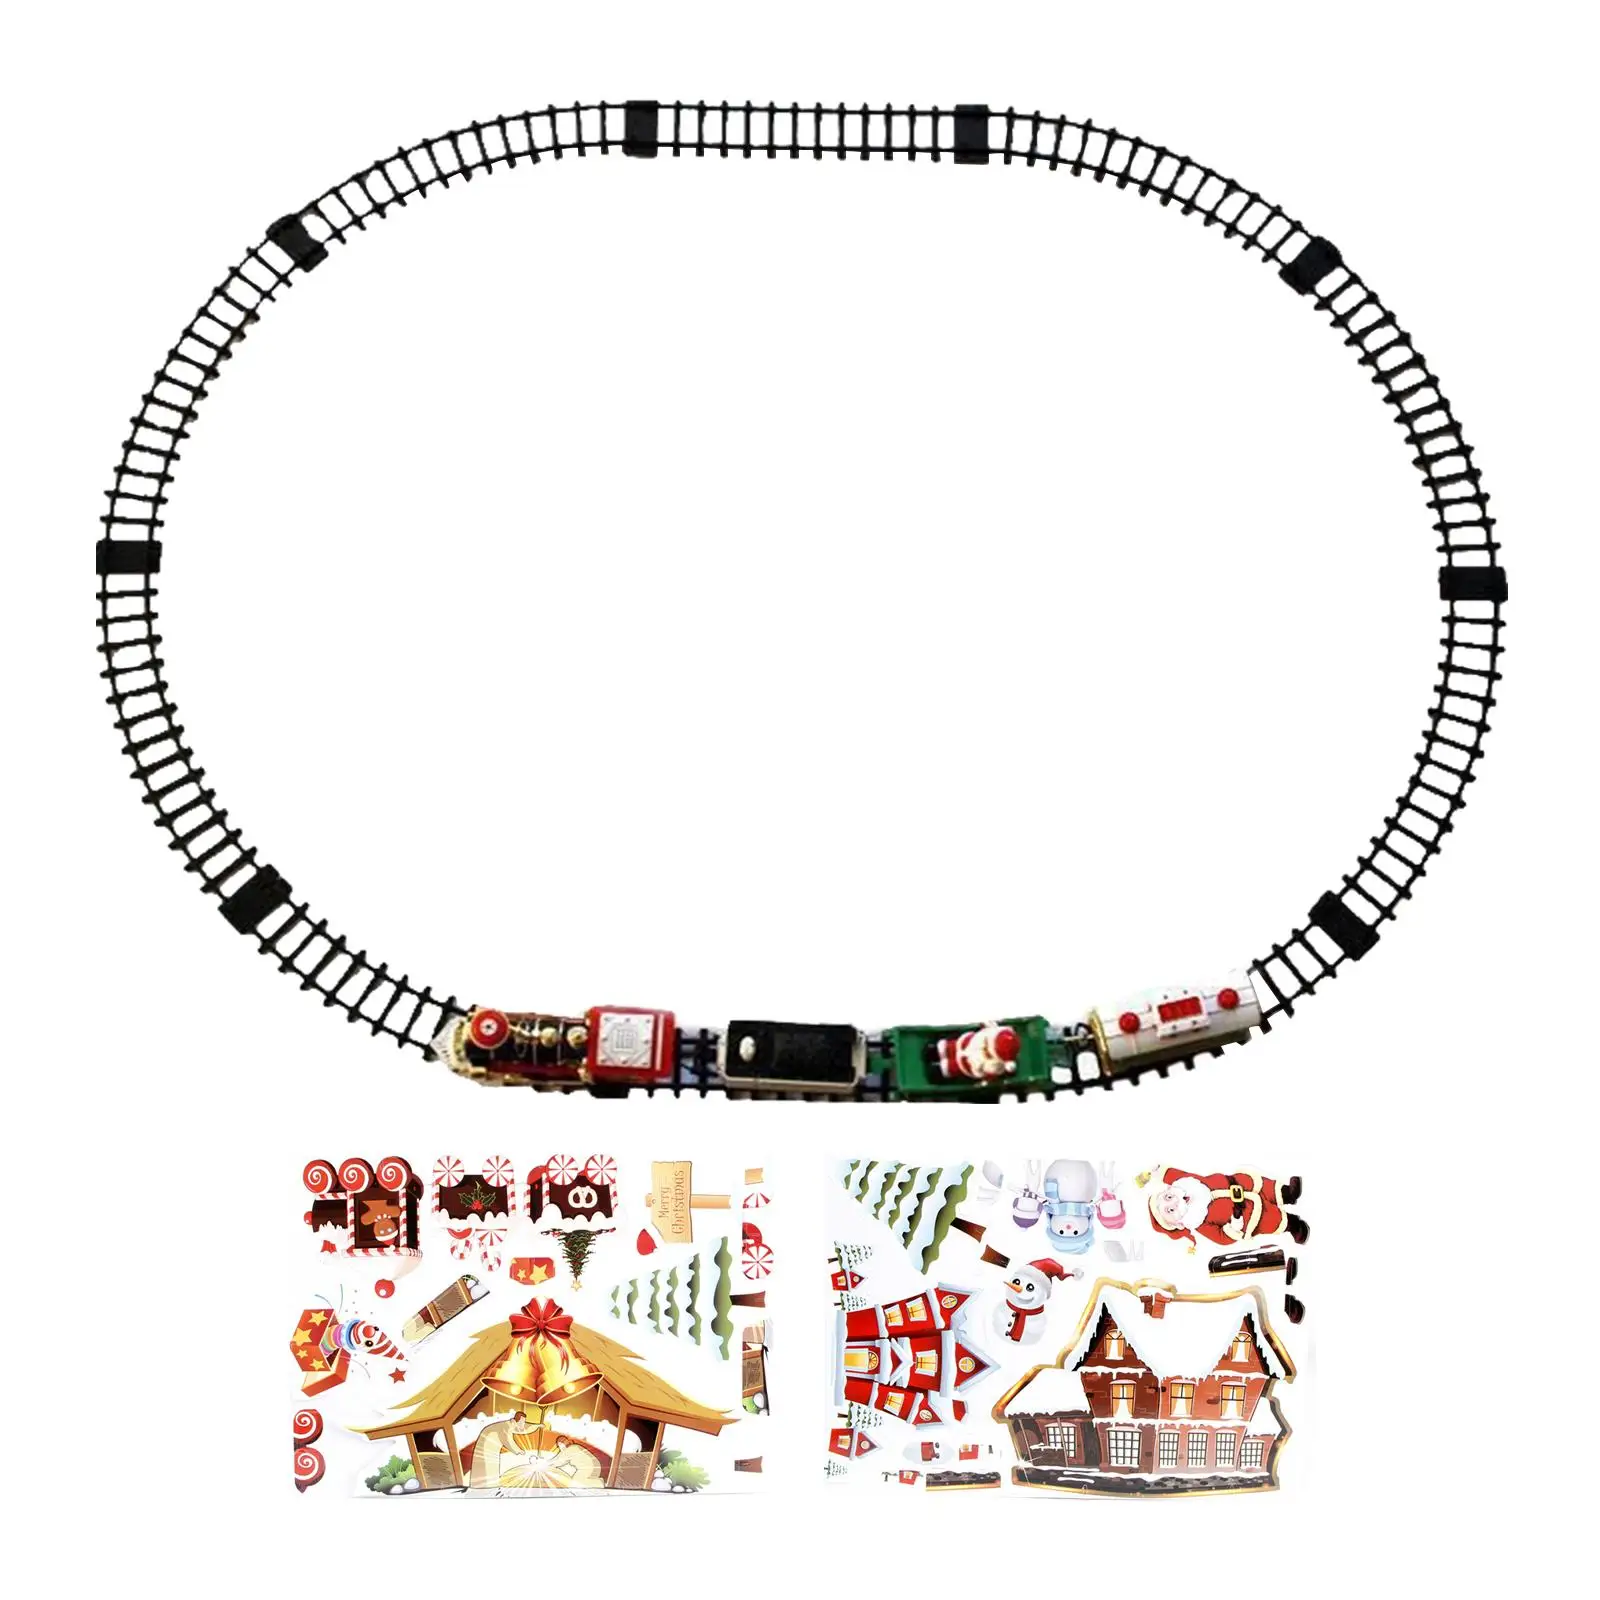 Electric Train kid Toy with Lights and Sounds Xmas Tree Decors Railway Track Set for Preschool Toddlers Girls Boys Gifts